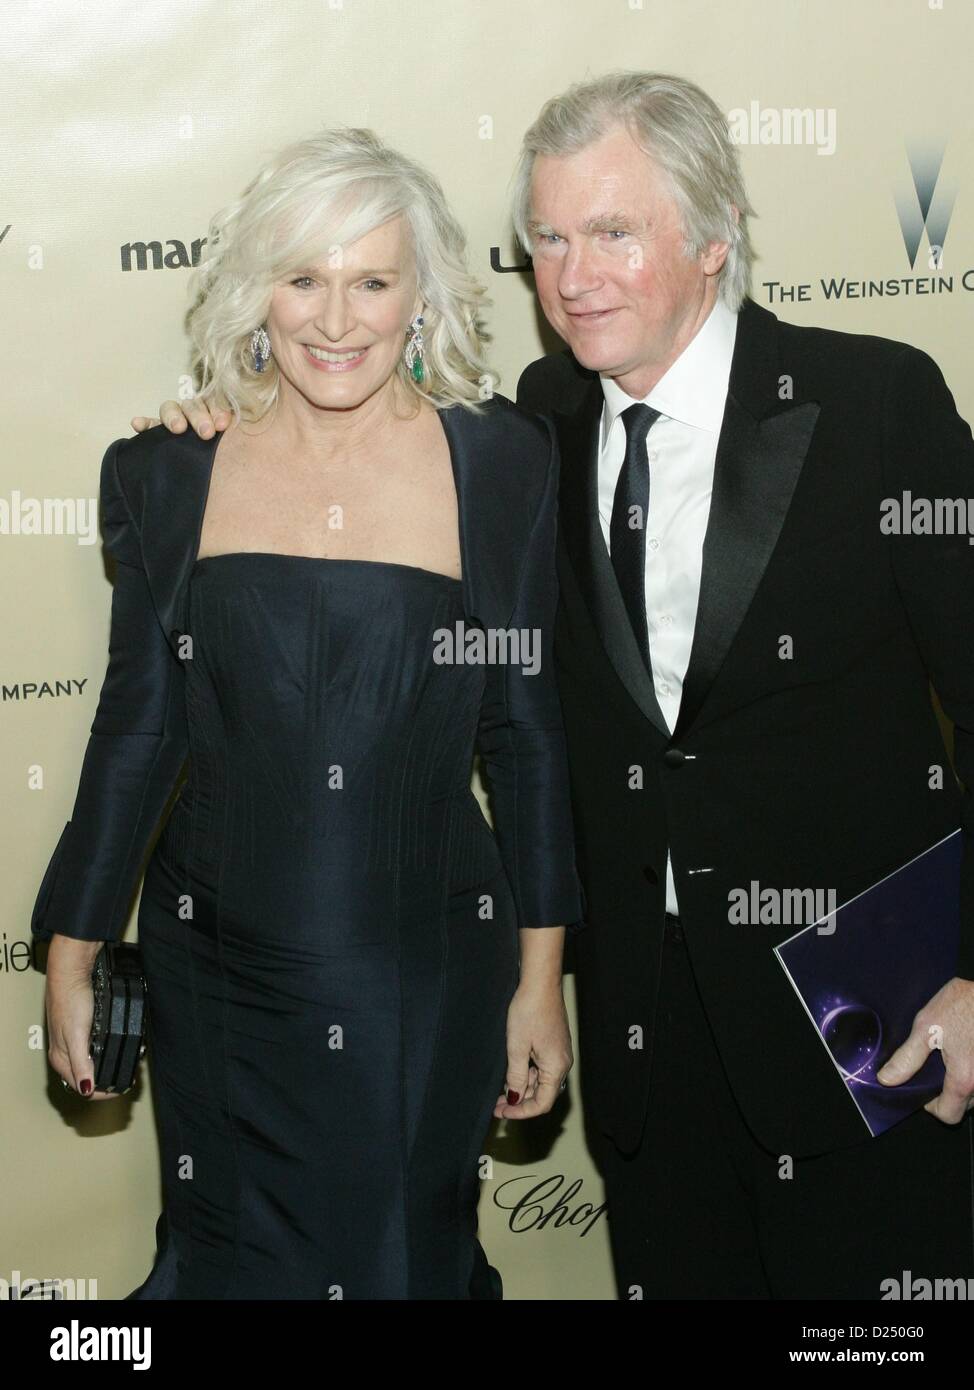 Beverly Hills, California, USA. 13th January 2013. Glenn Close, David Shaw at arrivals for The Weinstein Company 2012 Golden Globes After-Party-Part 2, The Old Trader Vic's, Beverly Hills, CA January 13, 2013. Photo By: James Atoa/Everett Collection Stock Photo